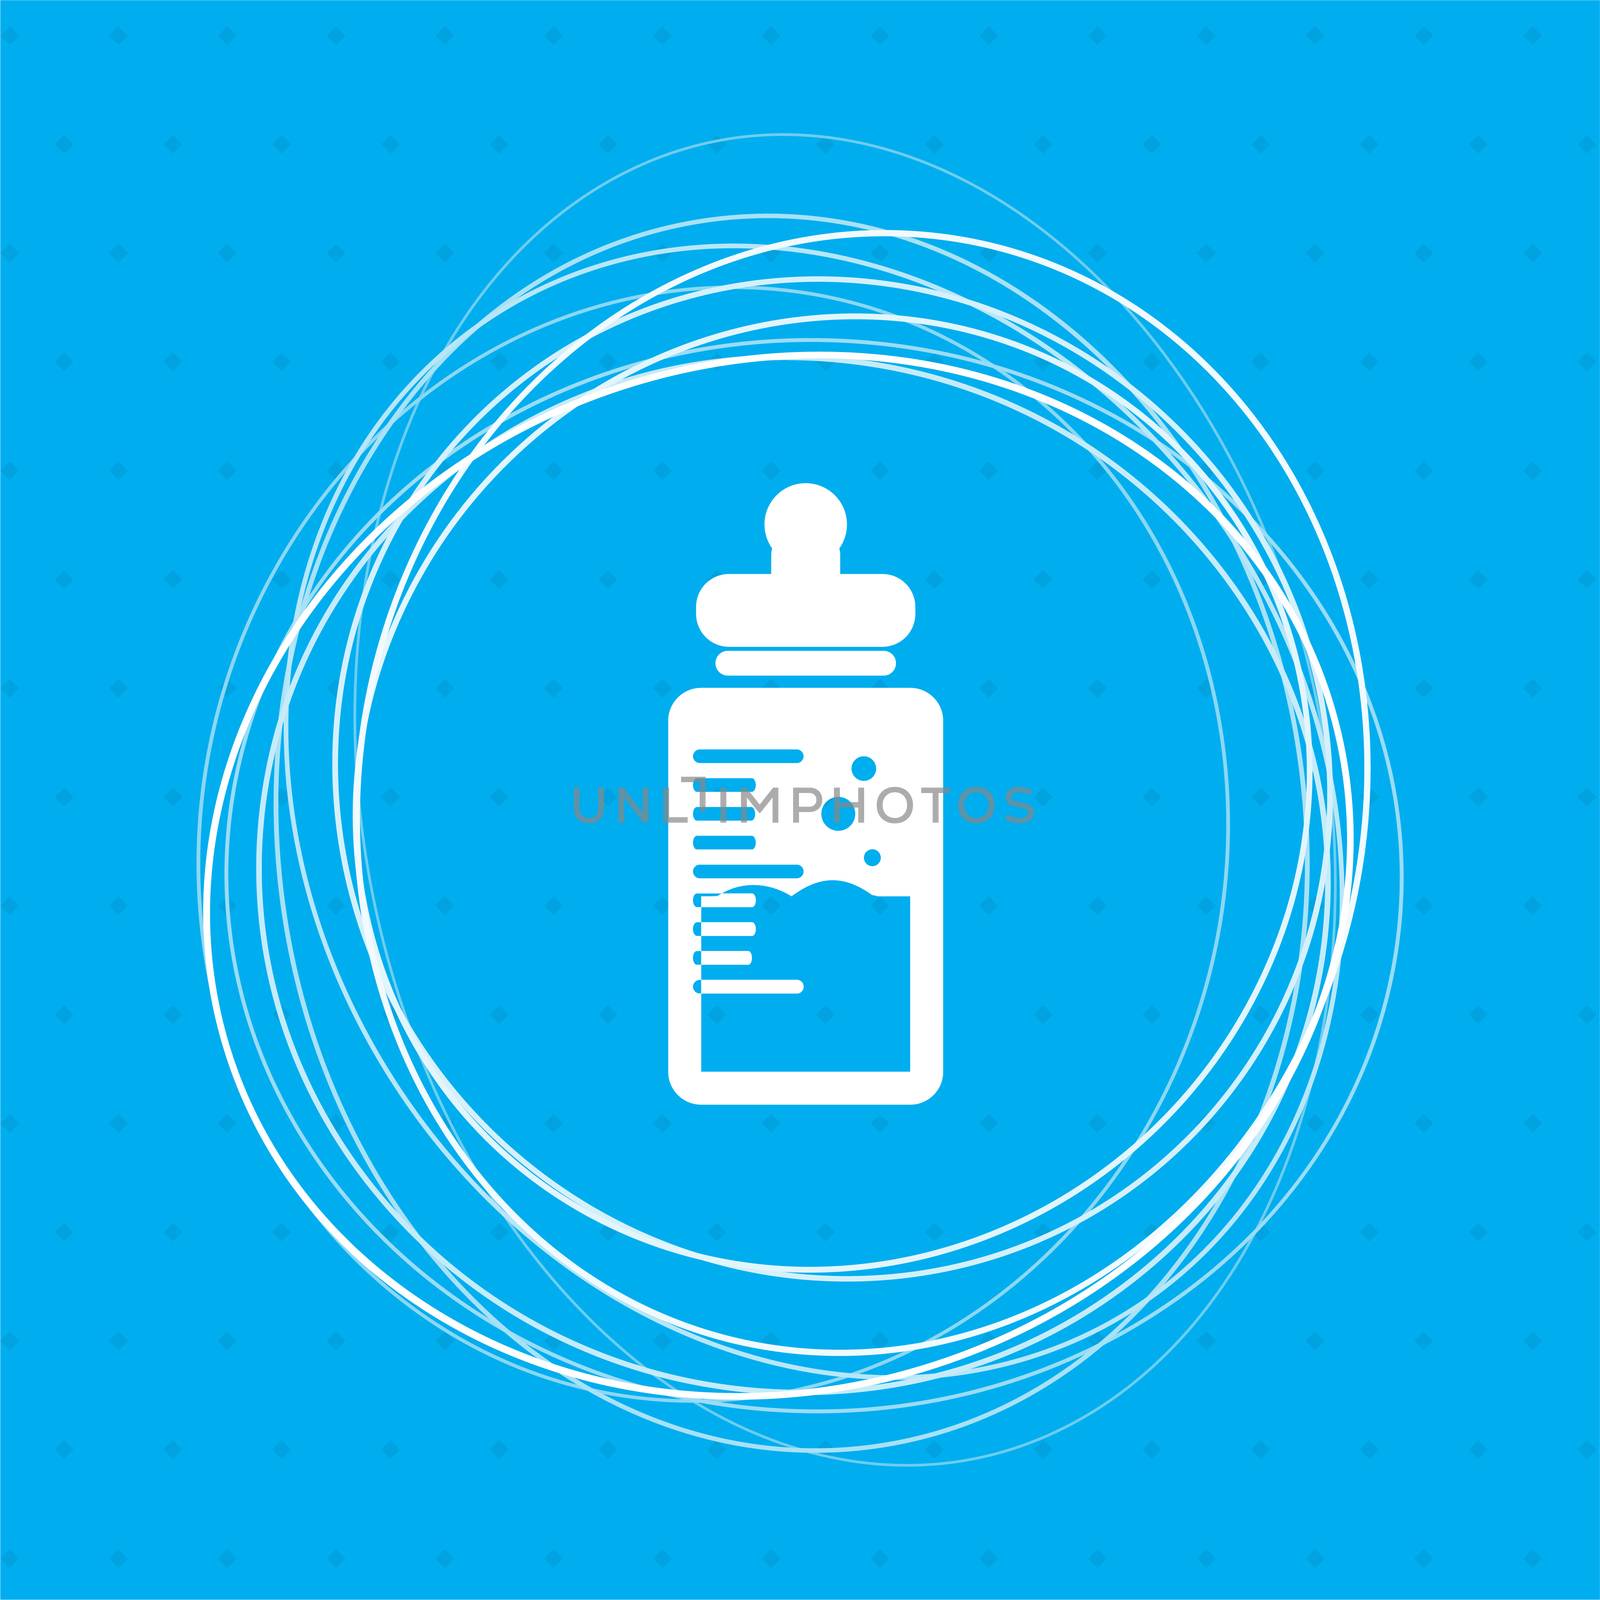 Baby milk bottle icon on a blue background with abstract circles around and place for your text. illustration